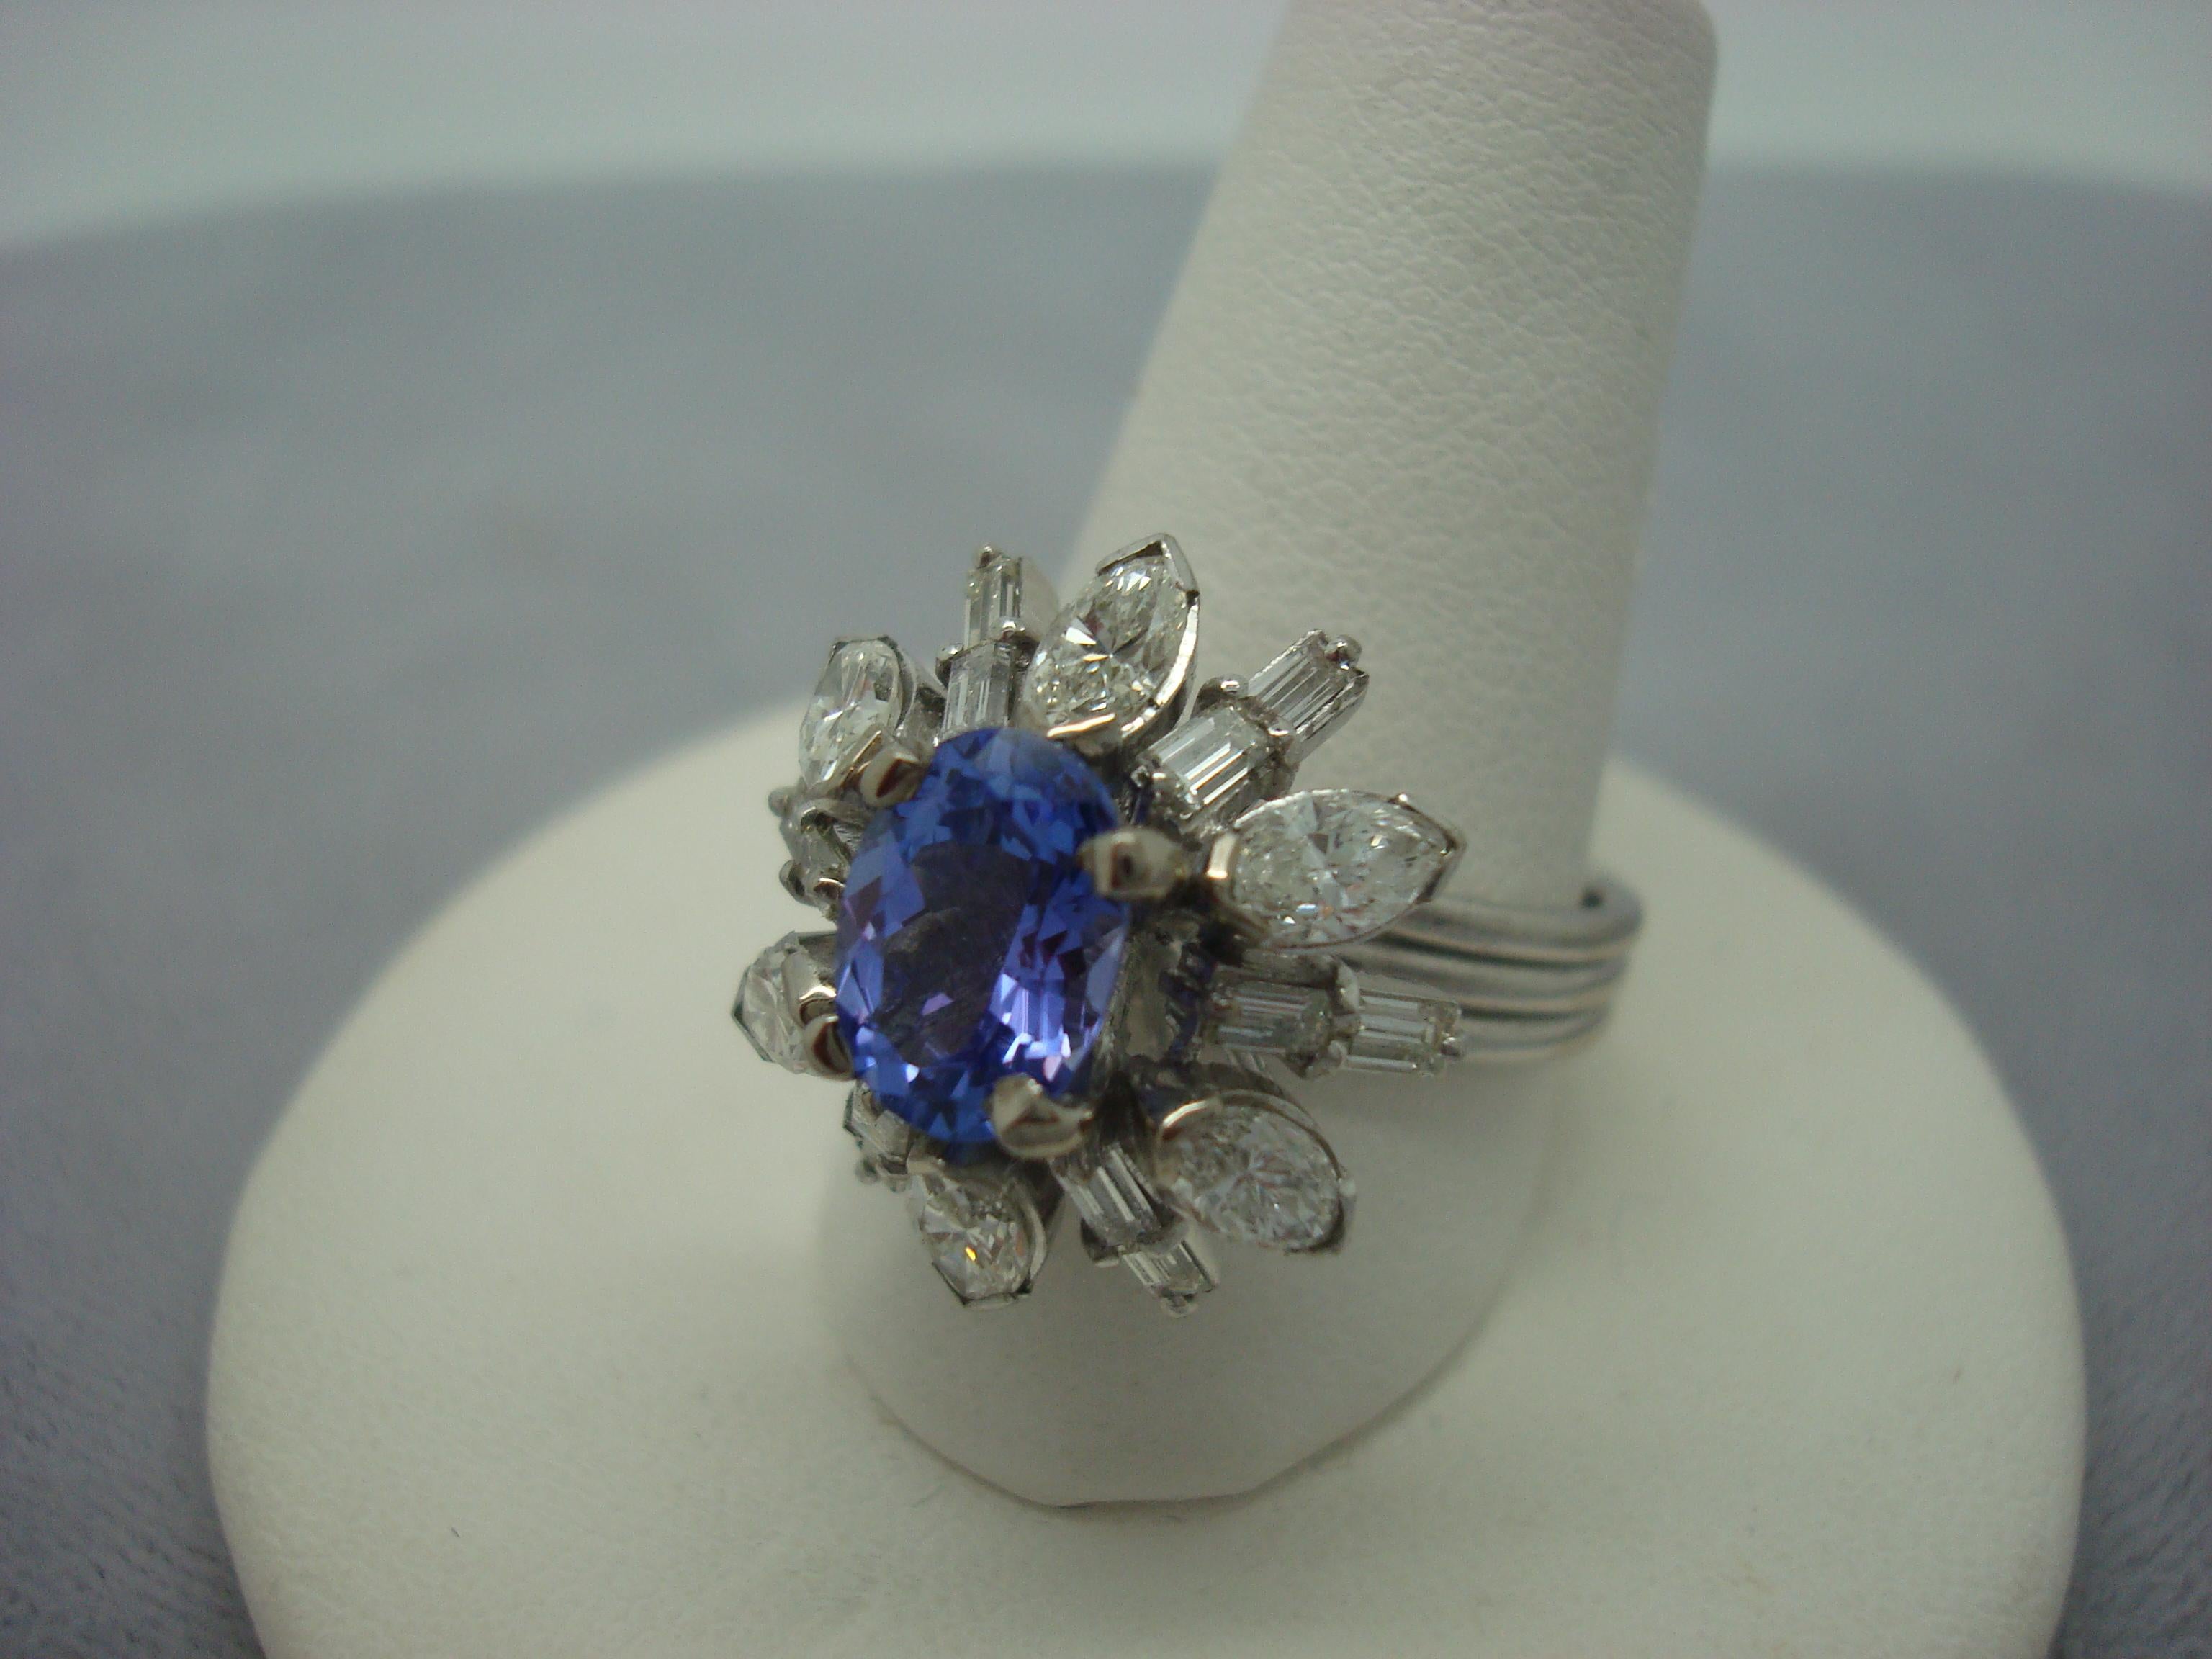 14k Gold Oval 1.35ct Genuine Natural Tanzanite Ring with Diamonds '#787' In Excellent Condition For Sale In Big Bend, WI